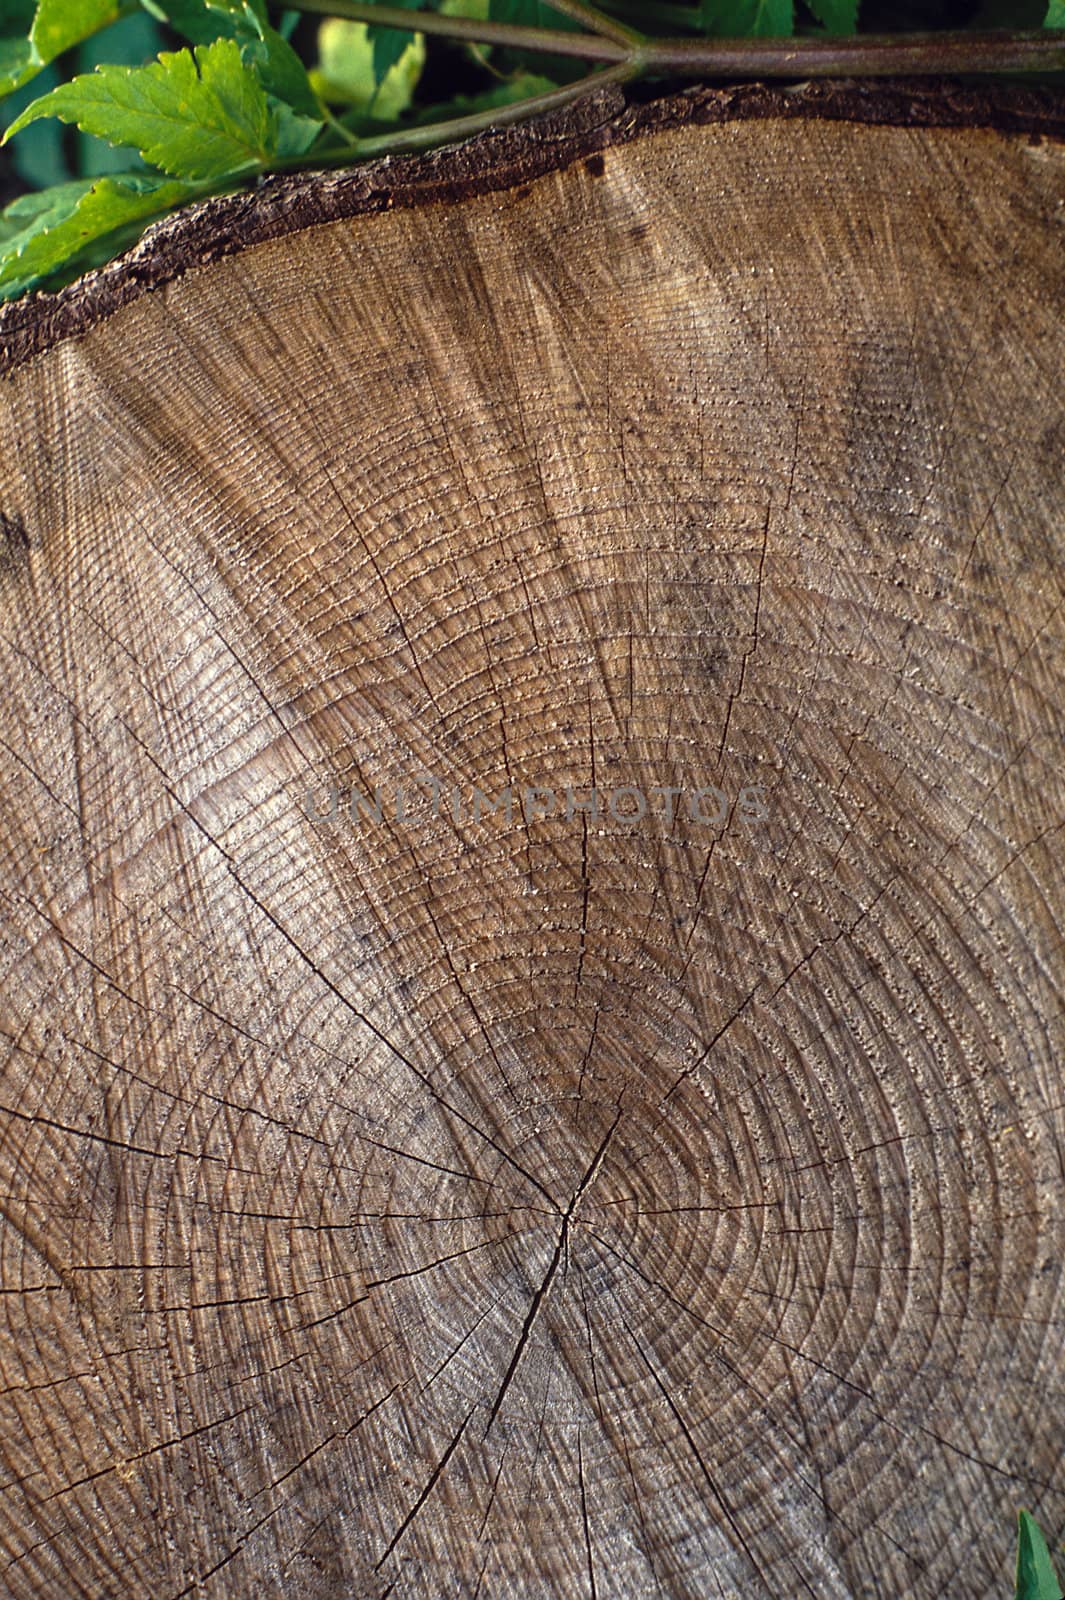 Growth rings on spruce or fir tree at high Applilachian elevation showing stunted growth via growth rings